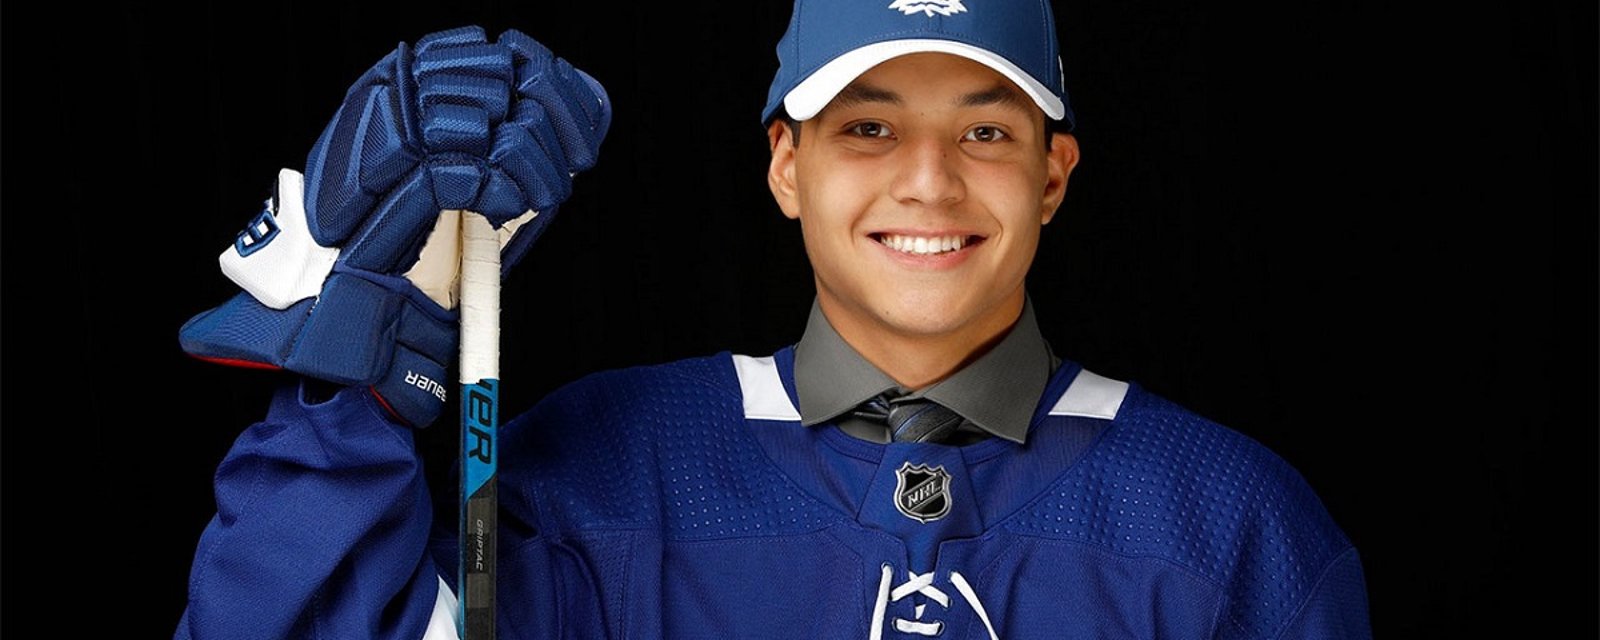 Leafs prospect named the CHL's “Sportsman of the Year.”